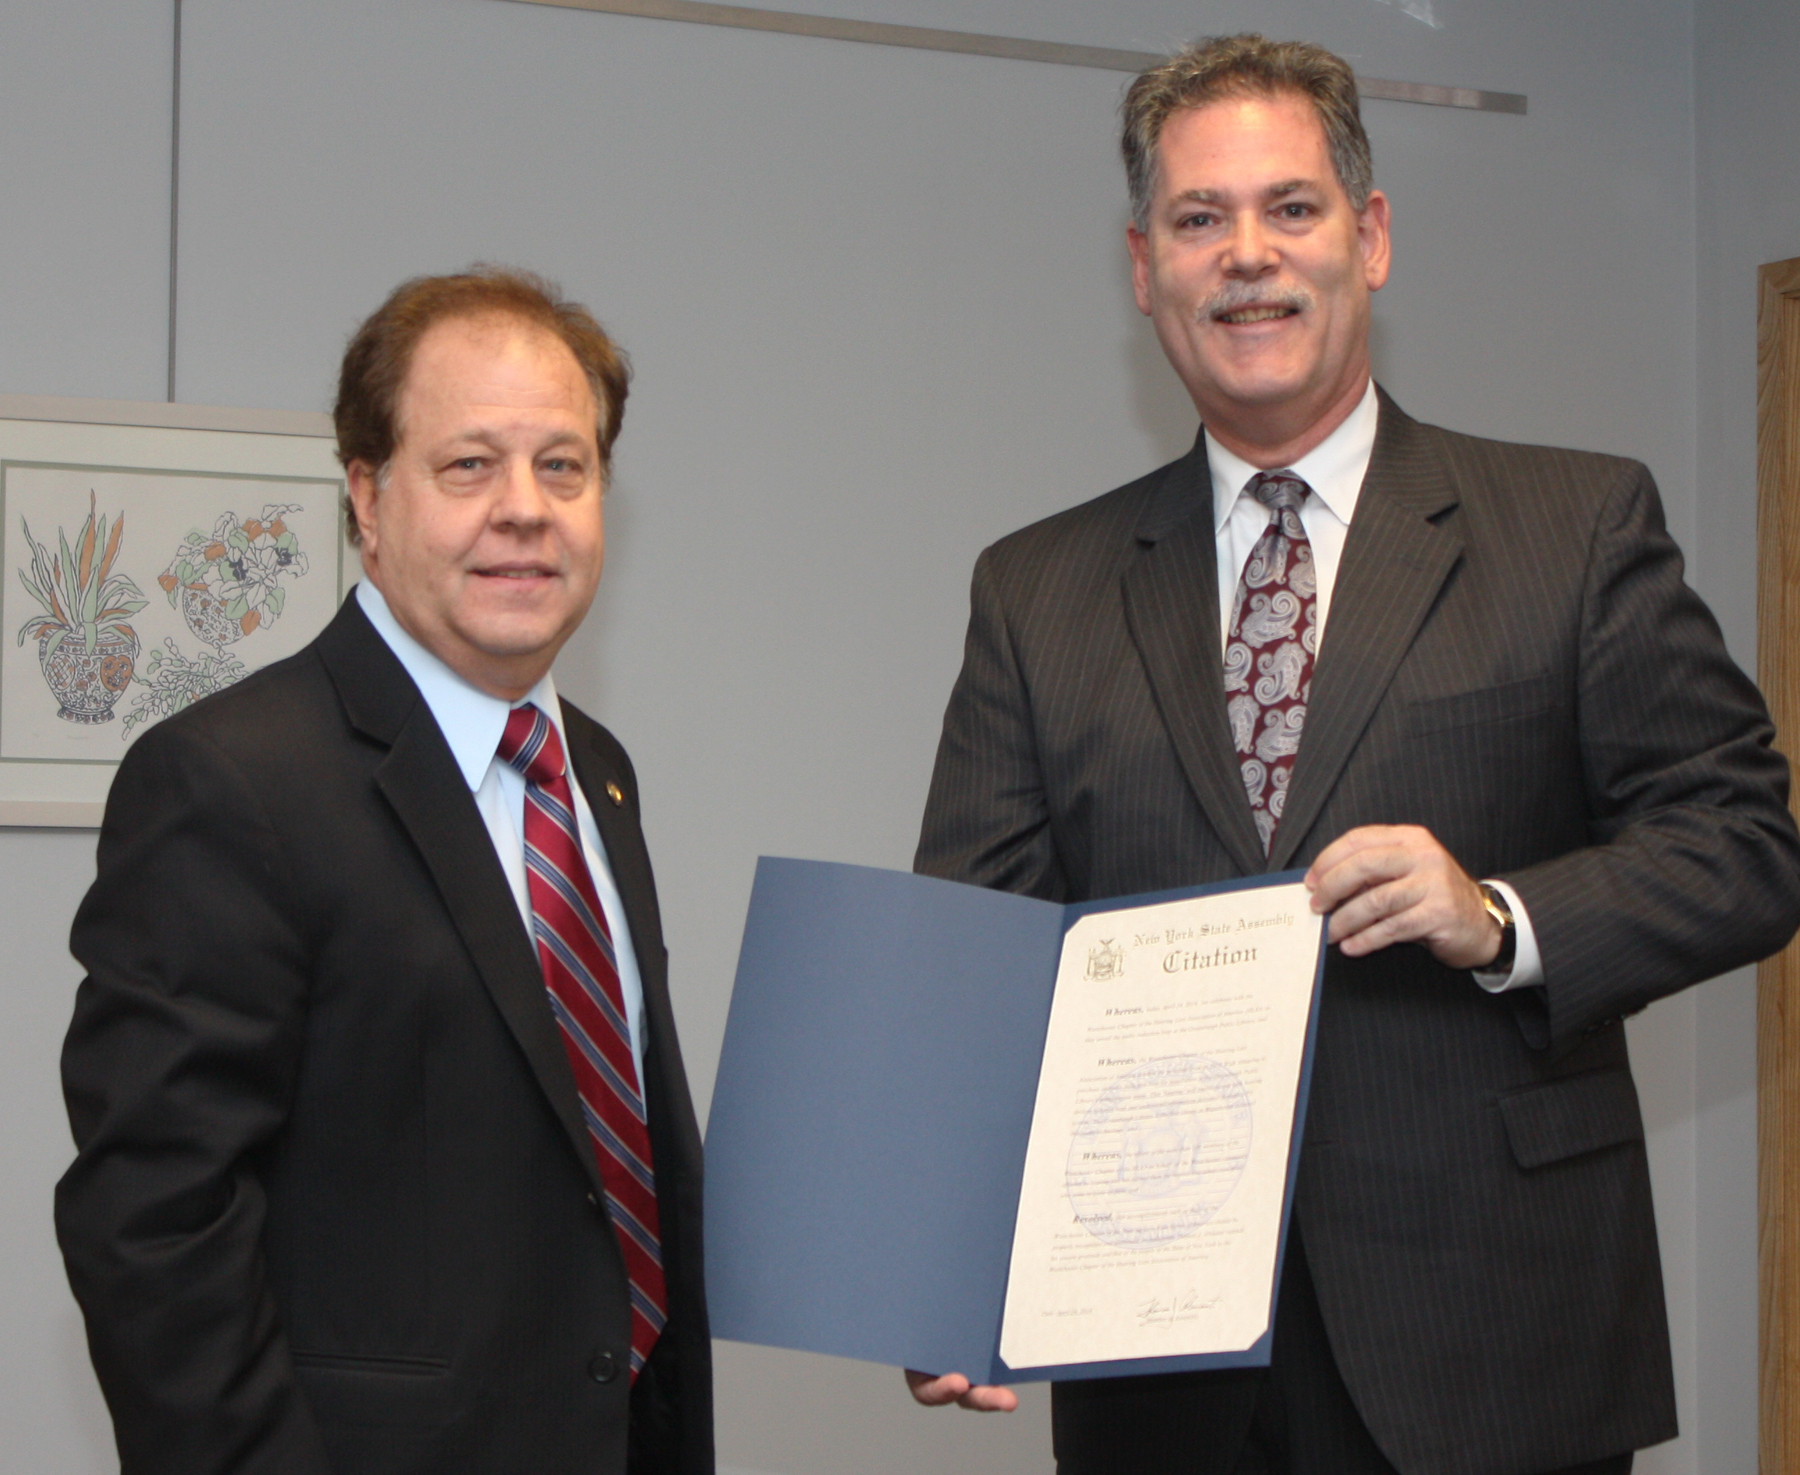 Assemblyman Thomas Abinanti (D-92nd District) presents David Goldwasser, co-chair of the 2014 Westchester/Rockland Walk4Hearing, with a Certificate of Merit.